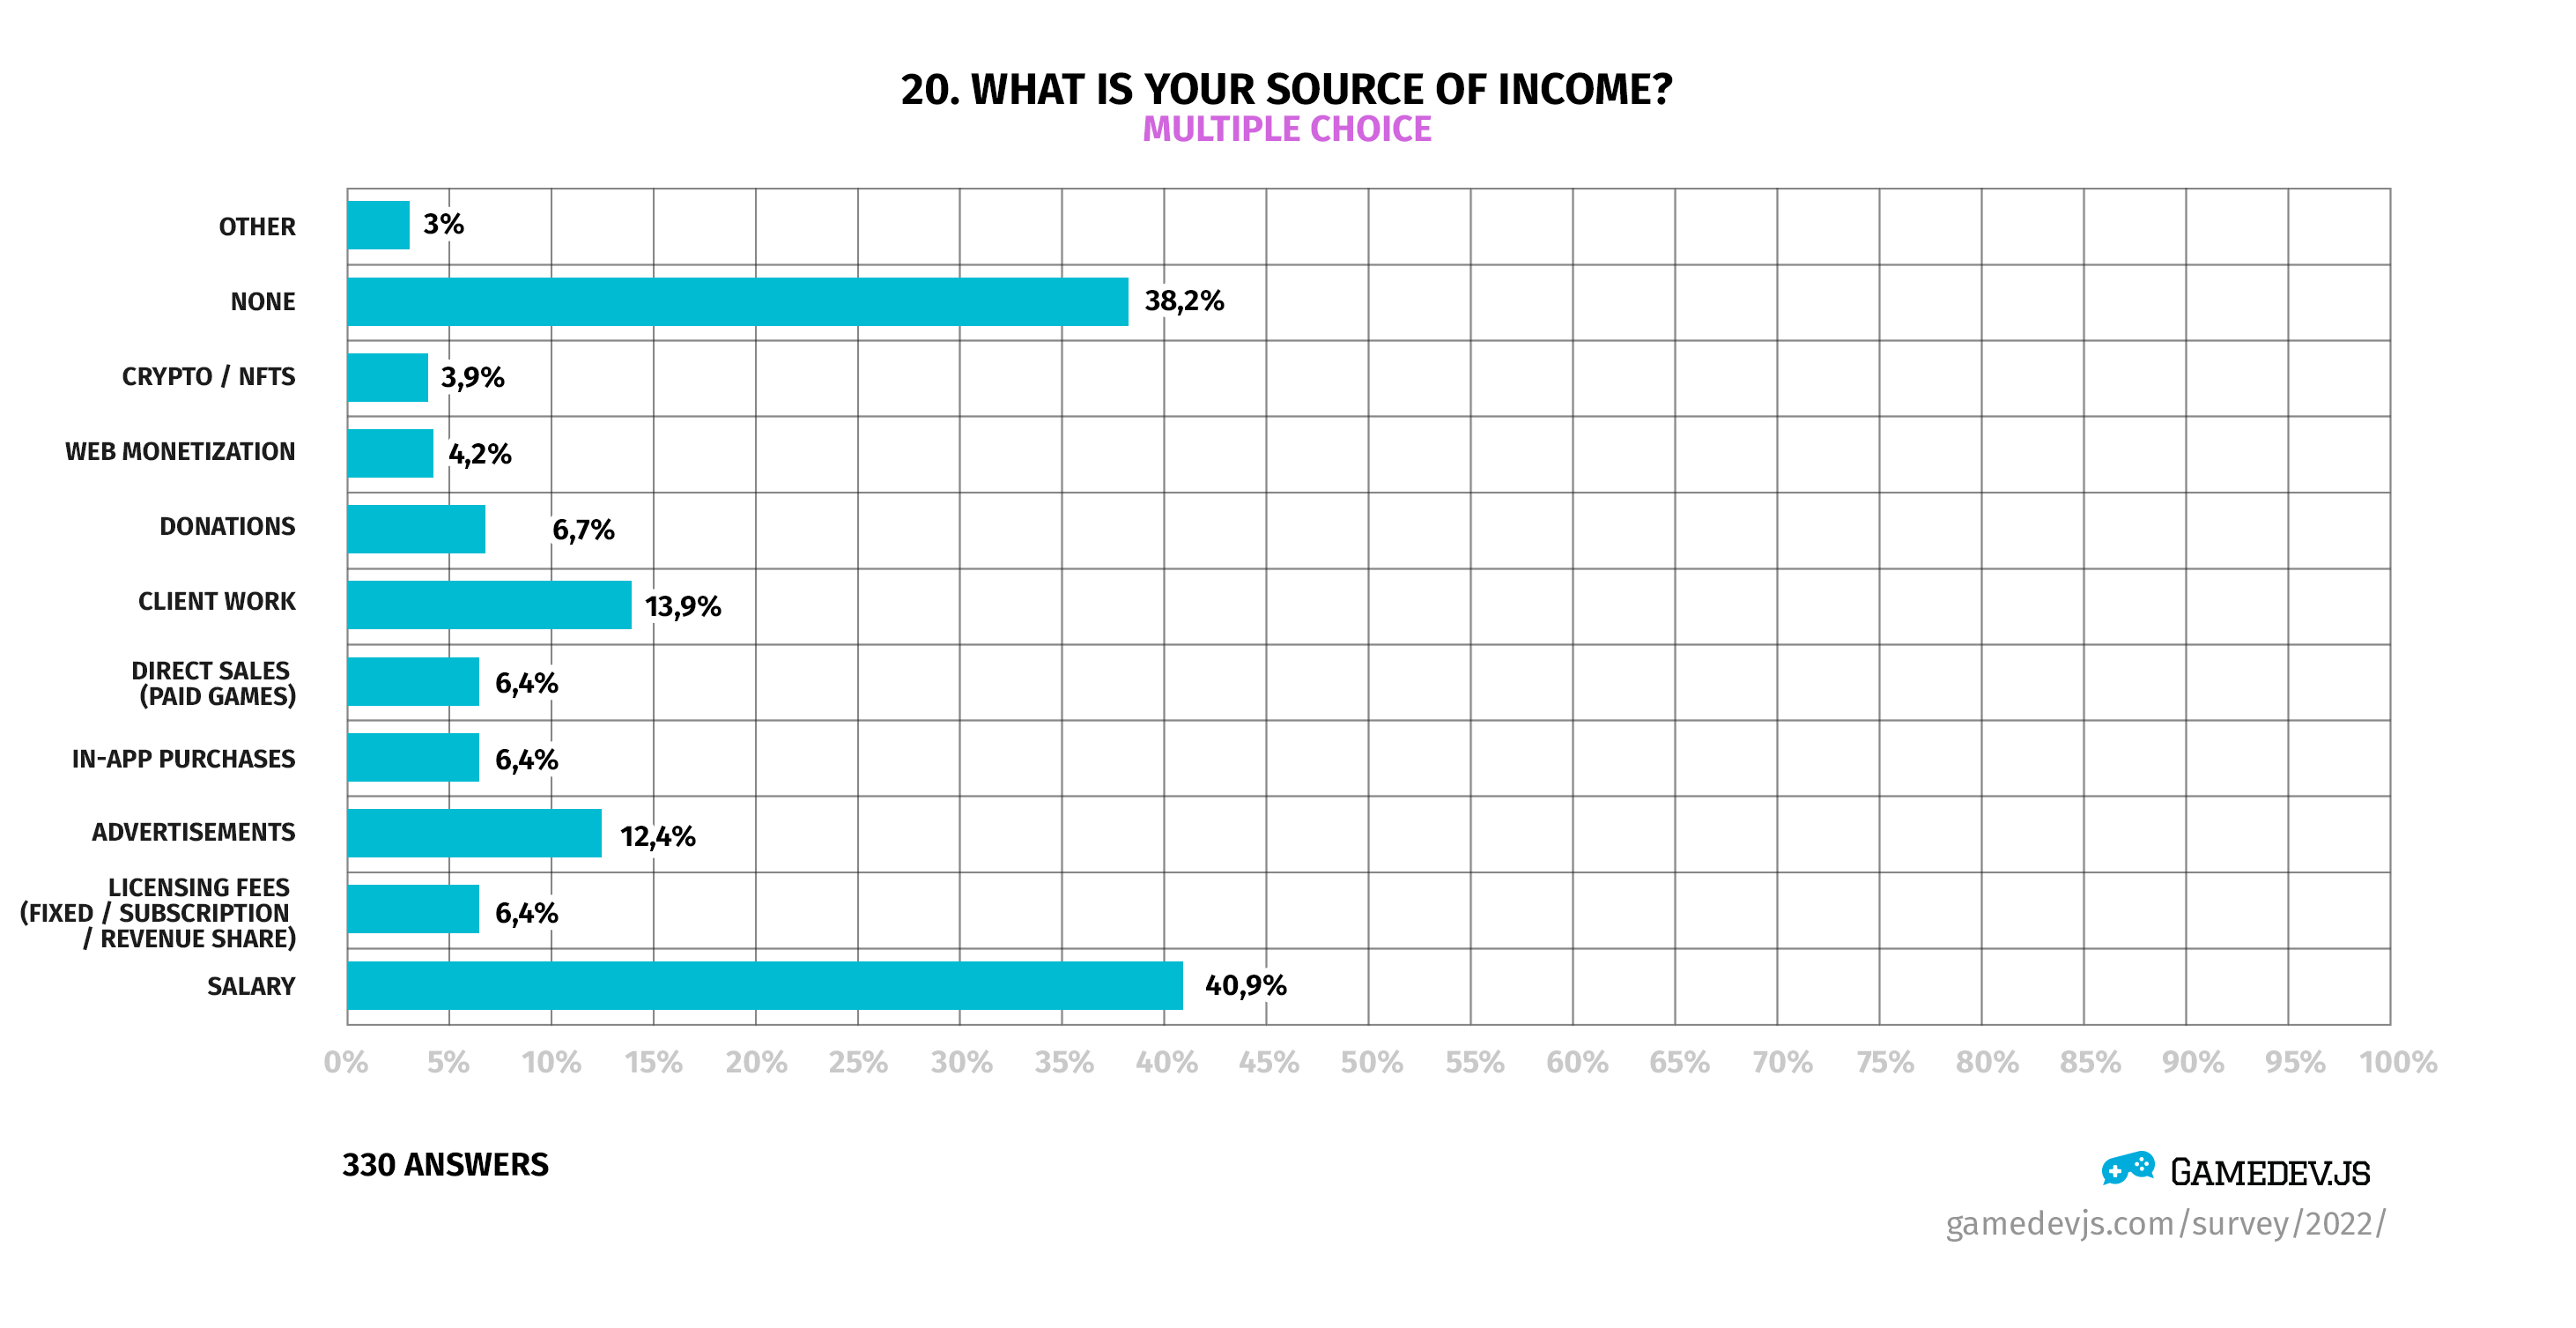 Gamedev.js Survey 2022 - Question #20: What is your source of income?